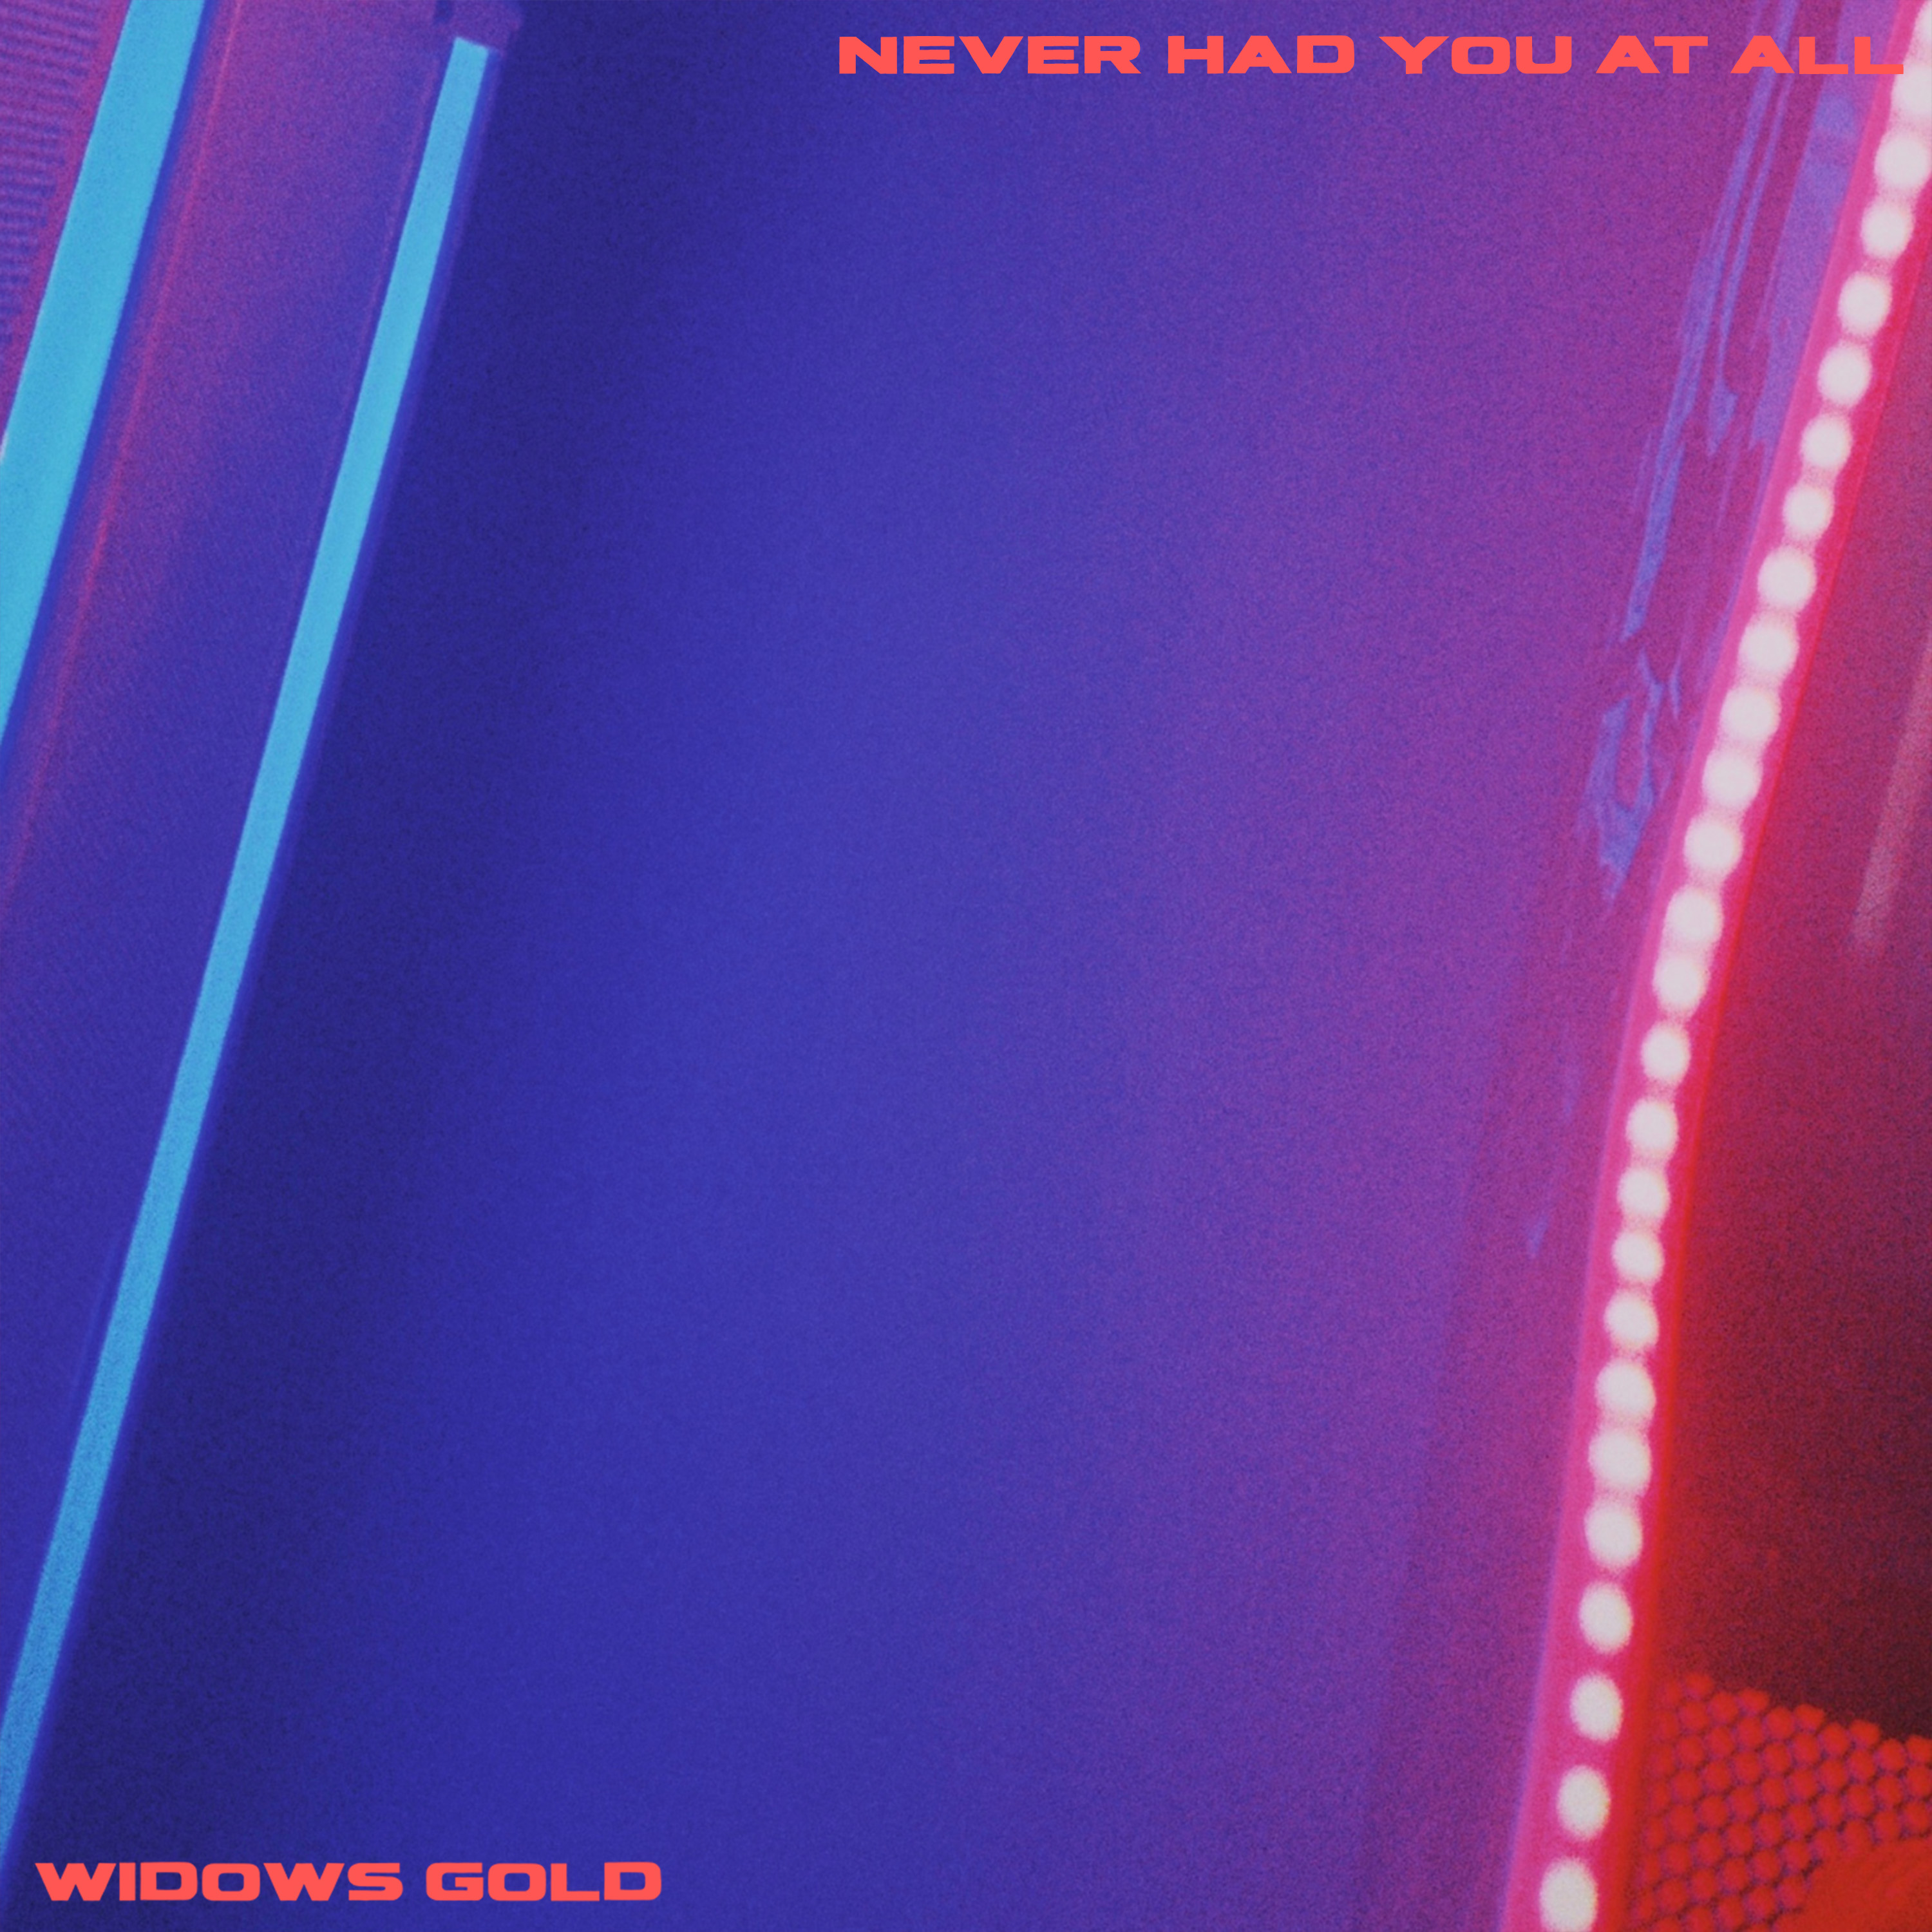 Widows Gold shares “Never Had You At All,” the final single from the new LP out Jan. 27